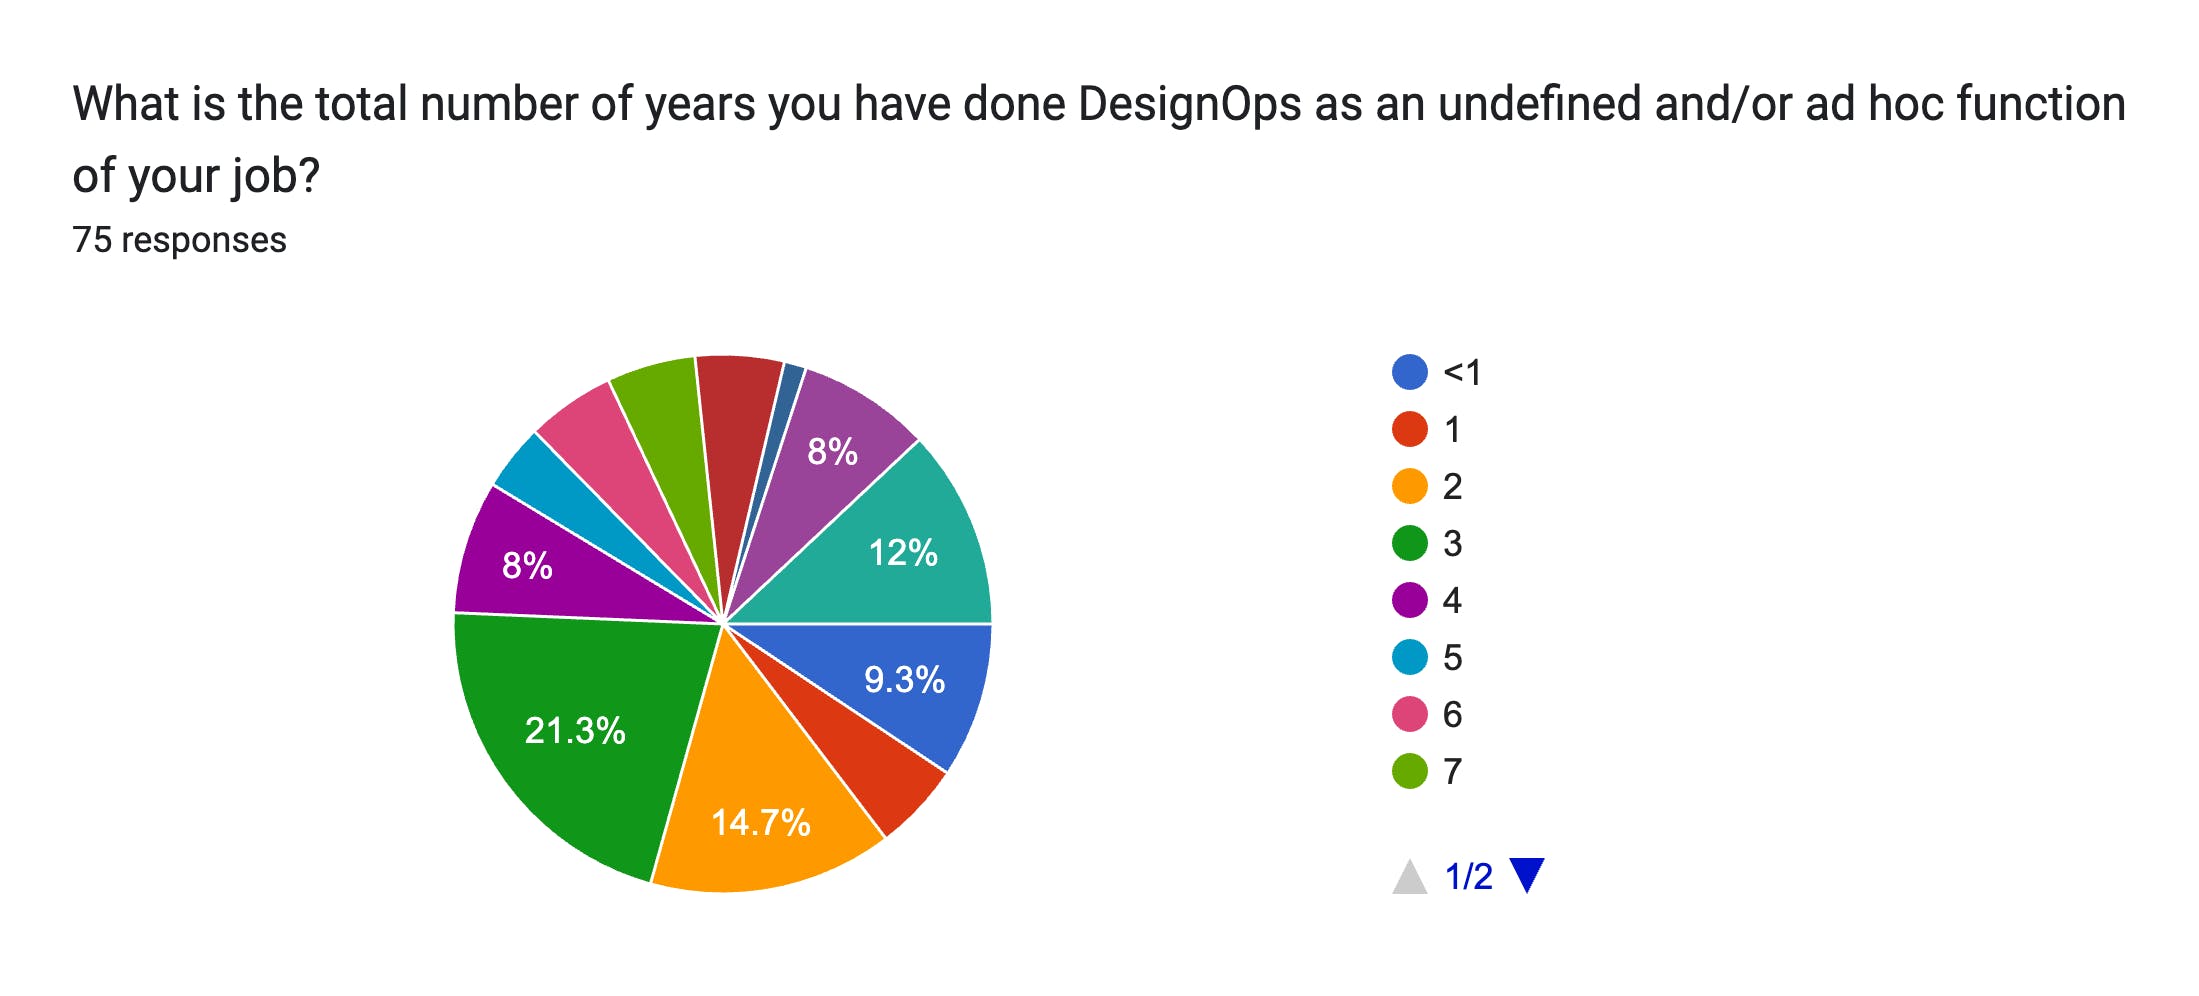 Forms response chart. Question title: What is the total number of years you have done DesignOps as an undefined and/or ad hoc function of your job?
. Number of responses: 75 responses.